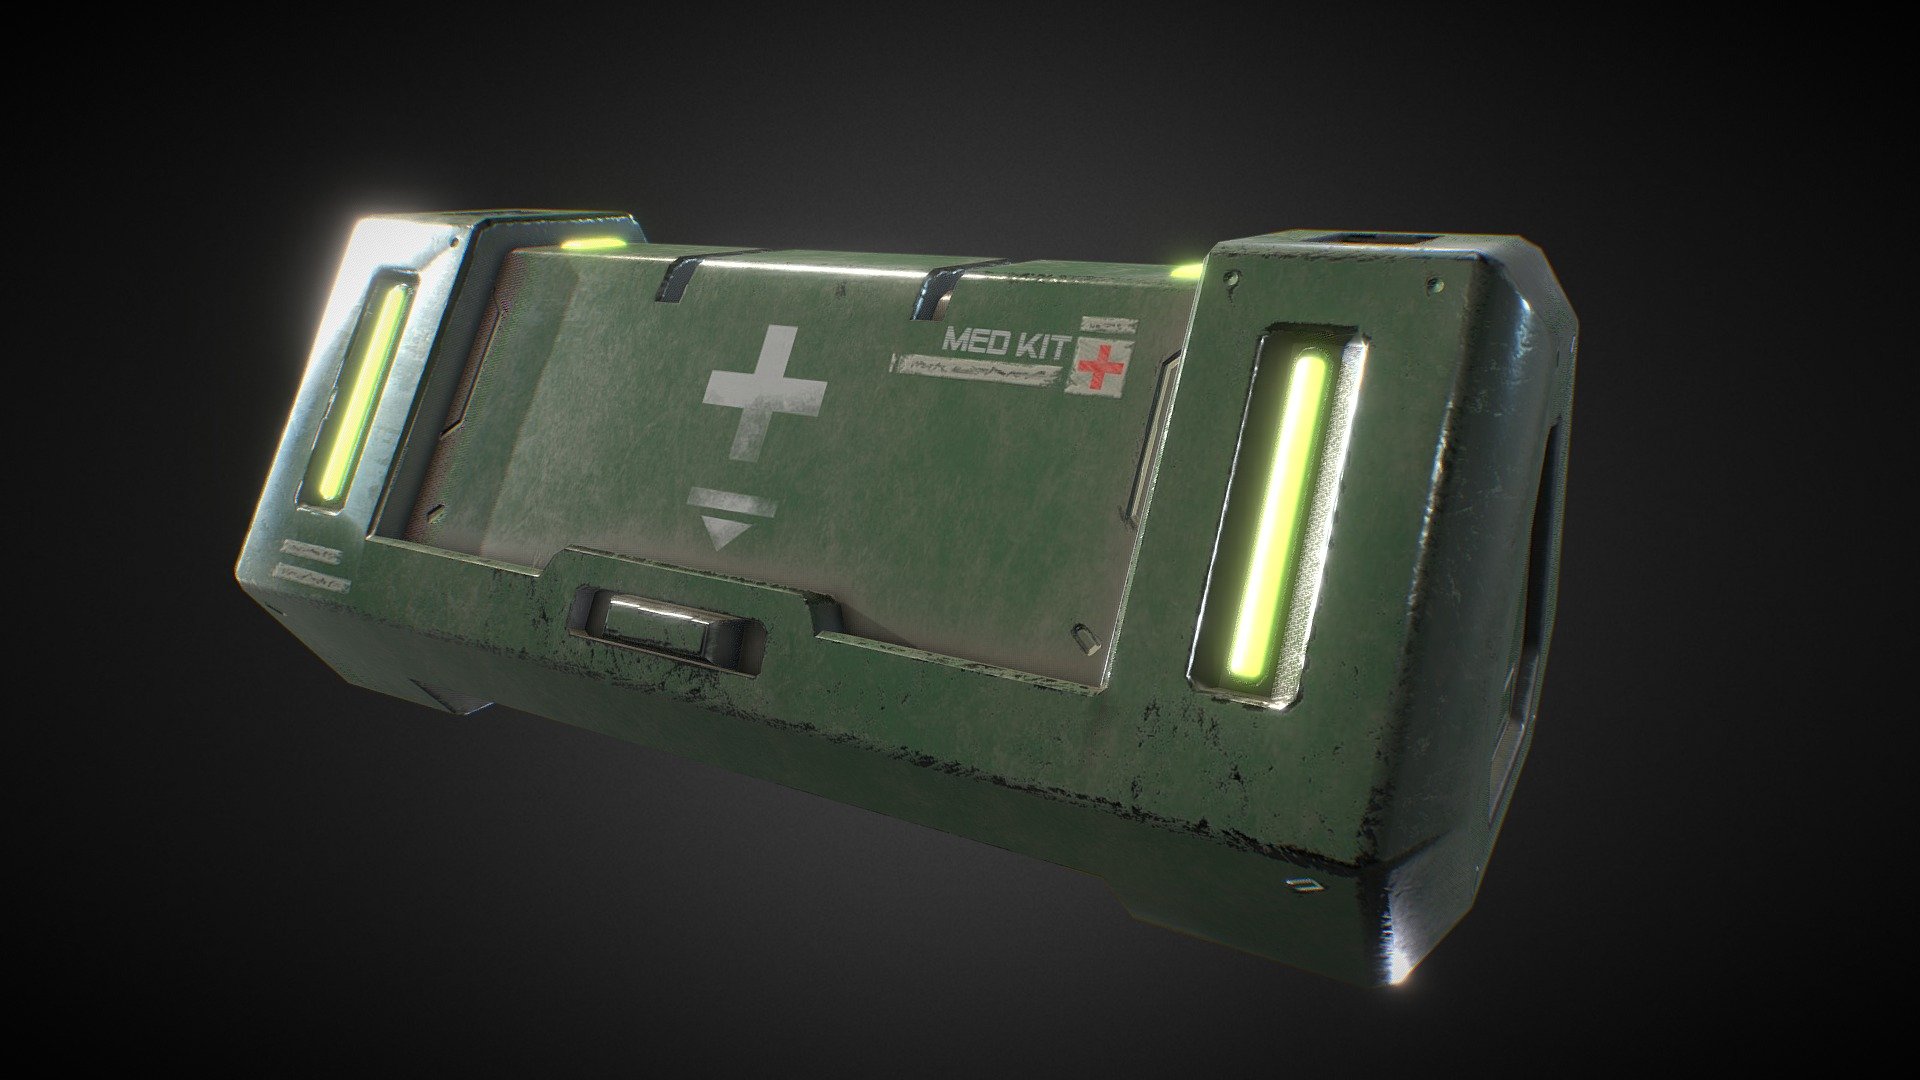 Modeled this crate based on this concept art by Pengzhen Zhang.

While the original concept depicts it as an ammunition crate, I reimagined it to be used as a med crate where you could interact with it and get health or med kits. I went along with this theme and pushed it with the green color of the crate and lights to make it easily identifiable for the player at first glance 3d model